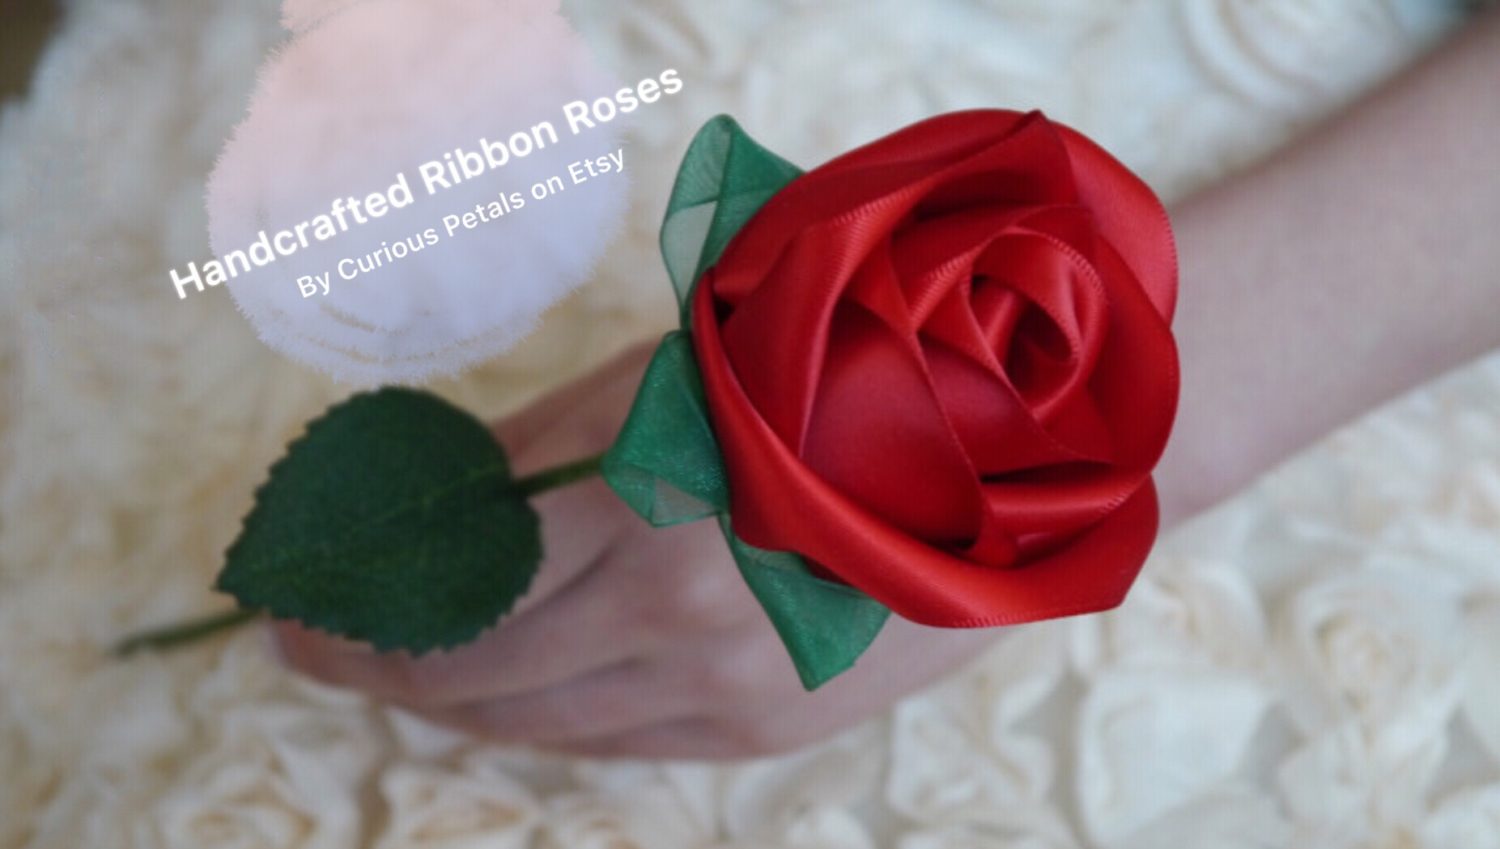 Handcrafted Ribbon Roses